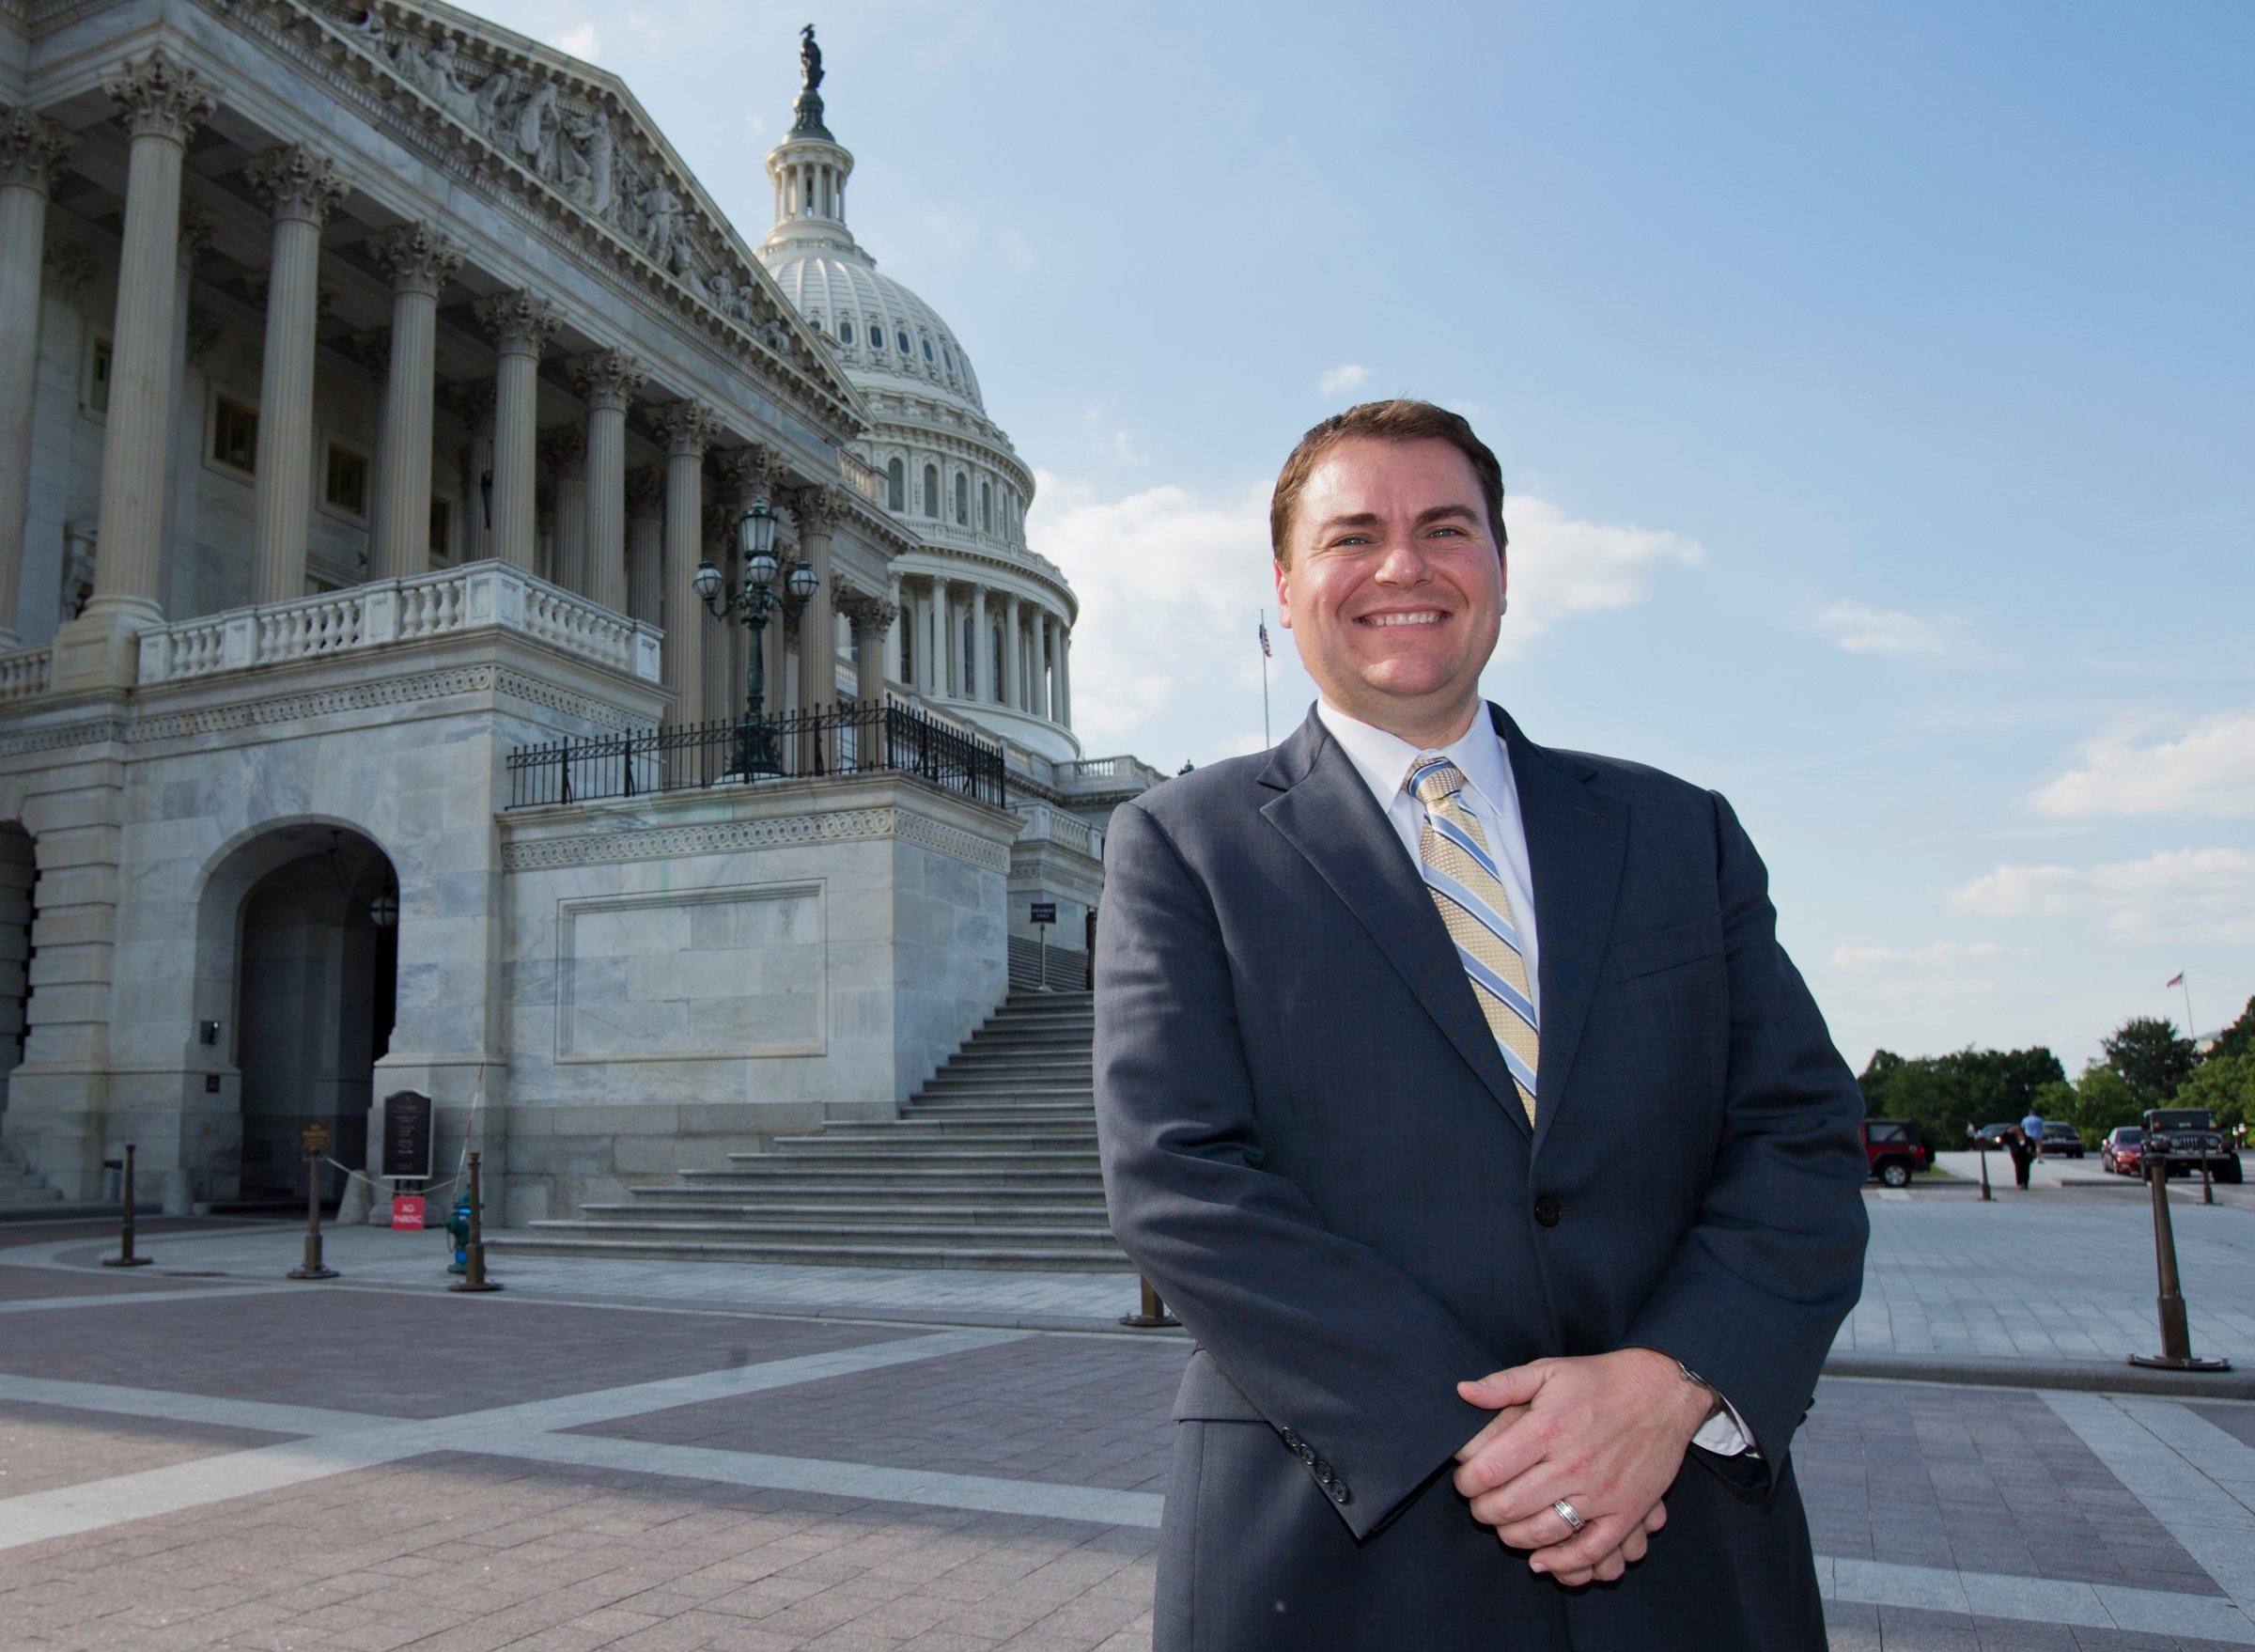 California Republican congressional candidate Carl DeMaio, poses for a picture on Capitol Hill in Washington on June 23, 2014.